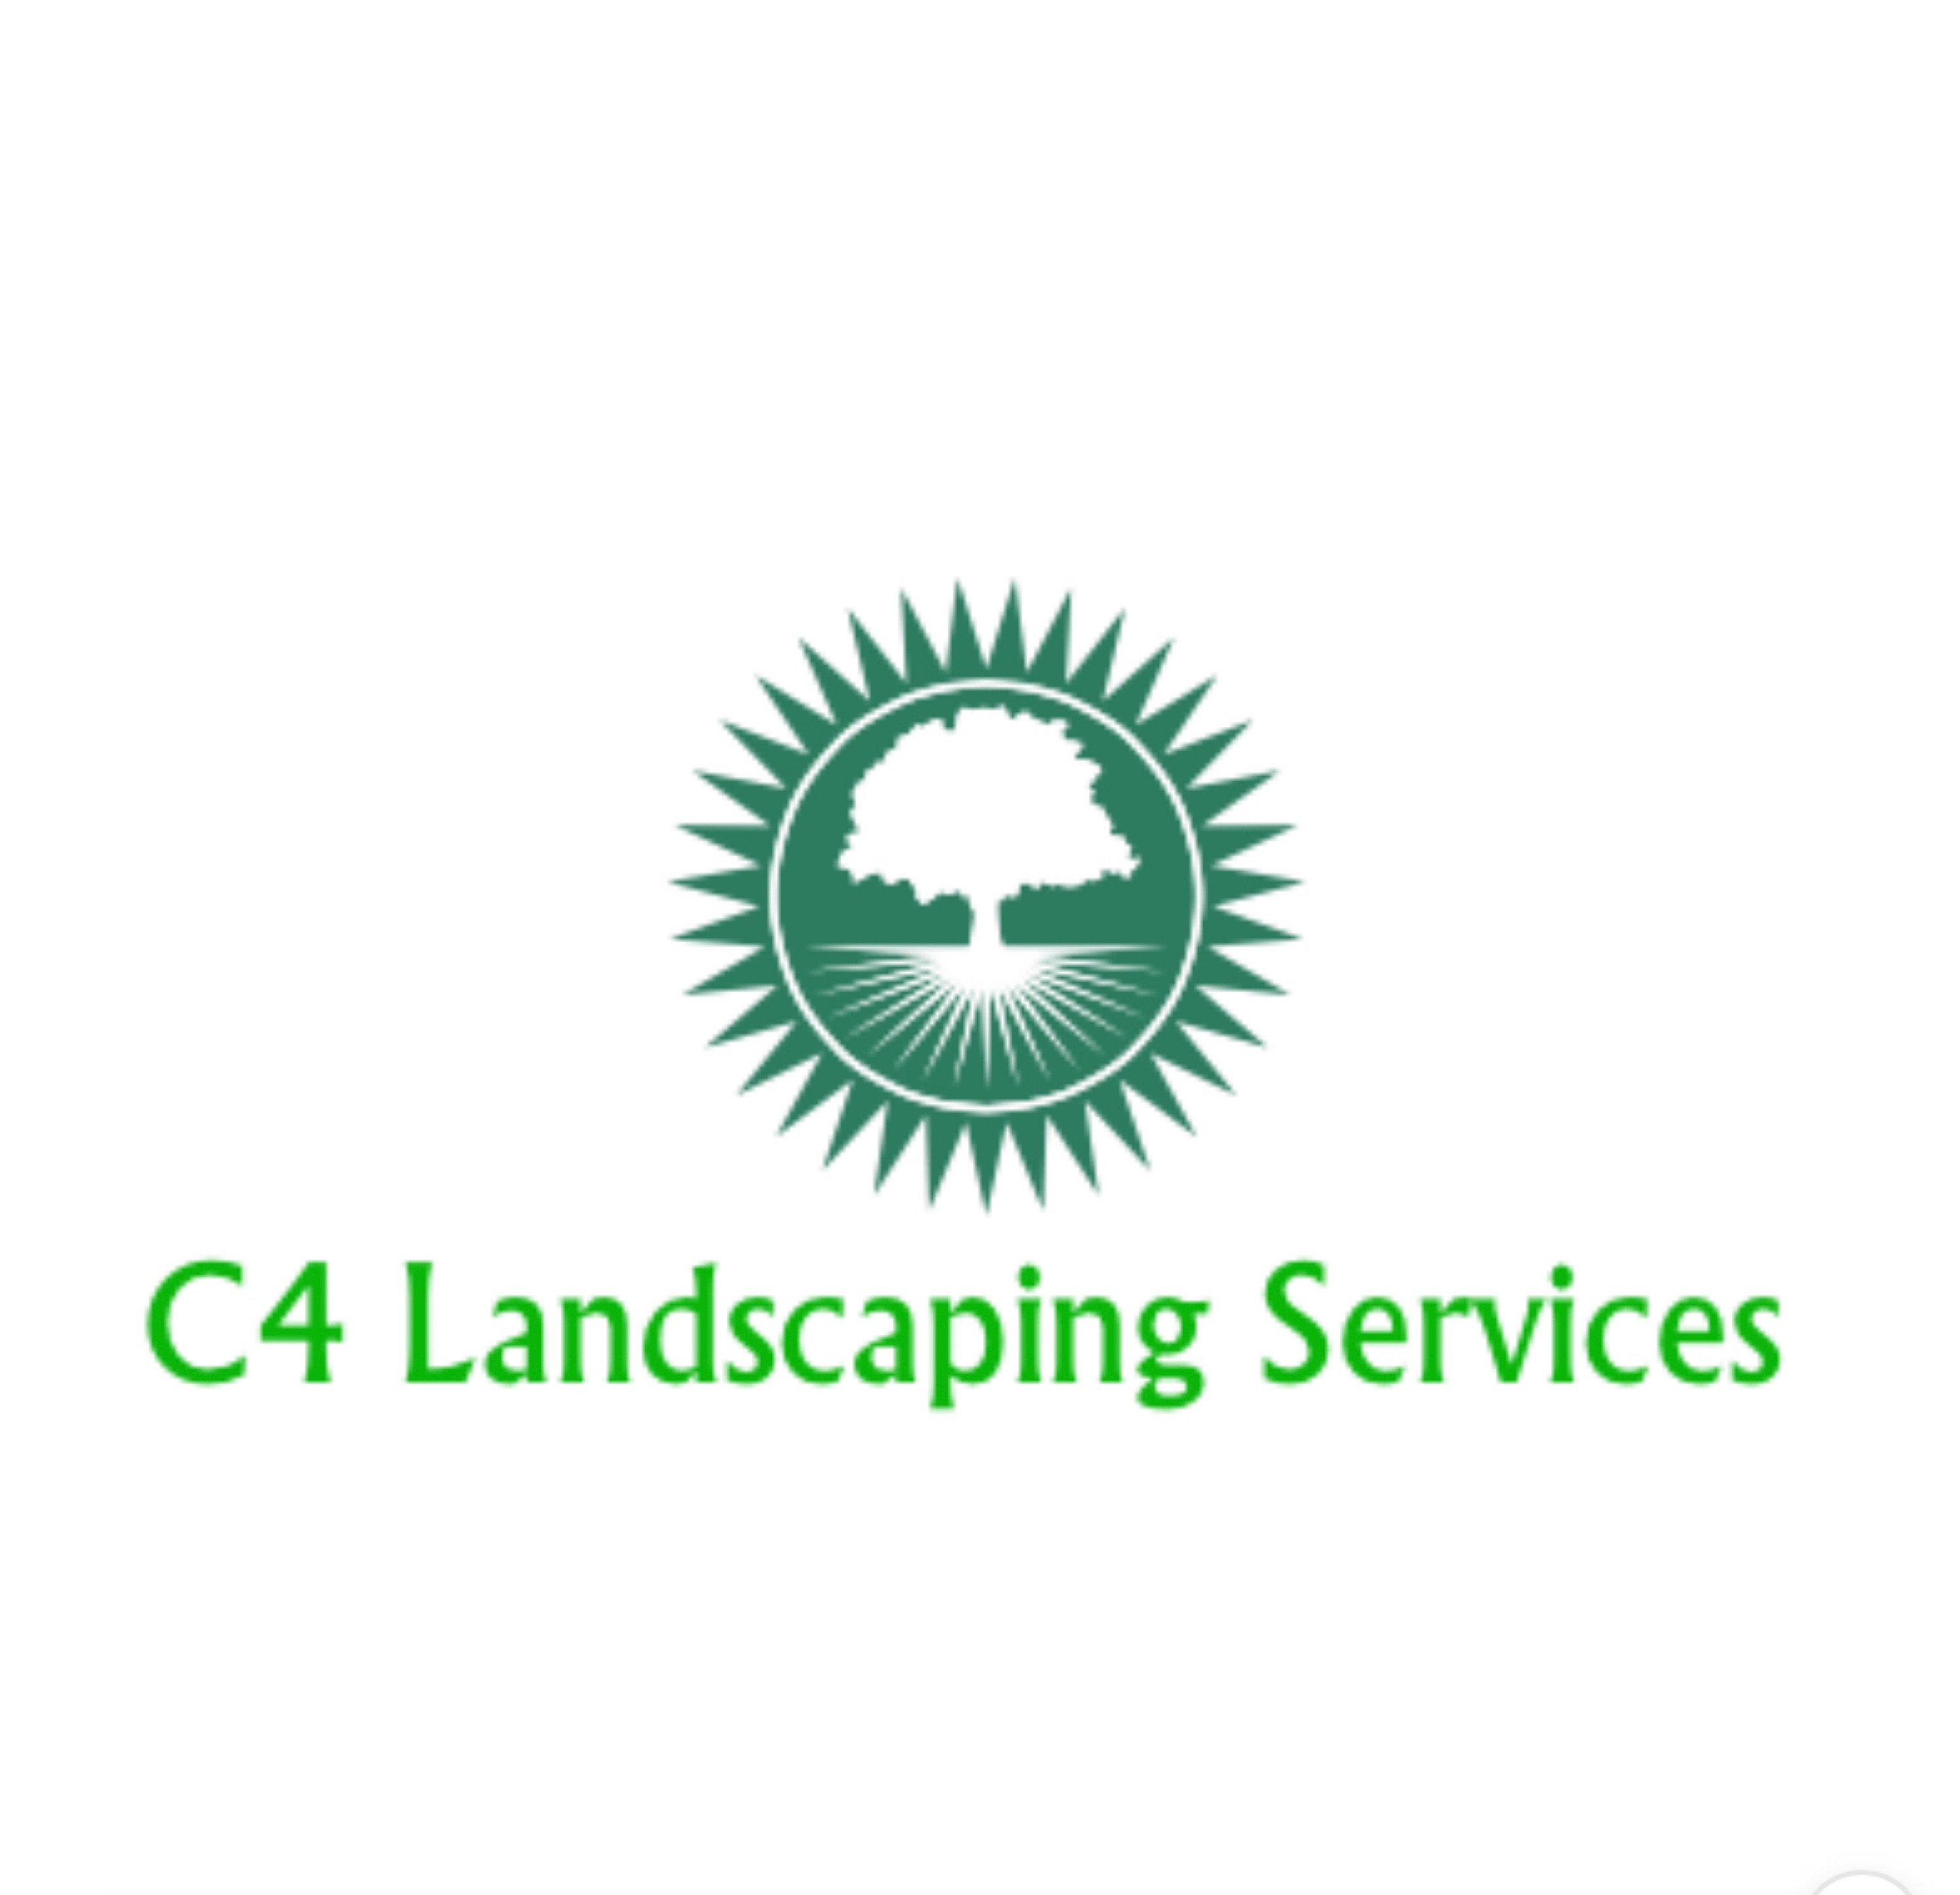 C4 Landscaping Services Logo